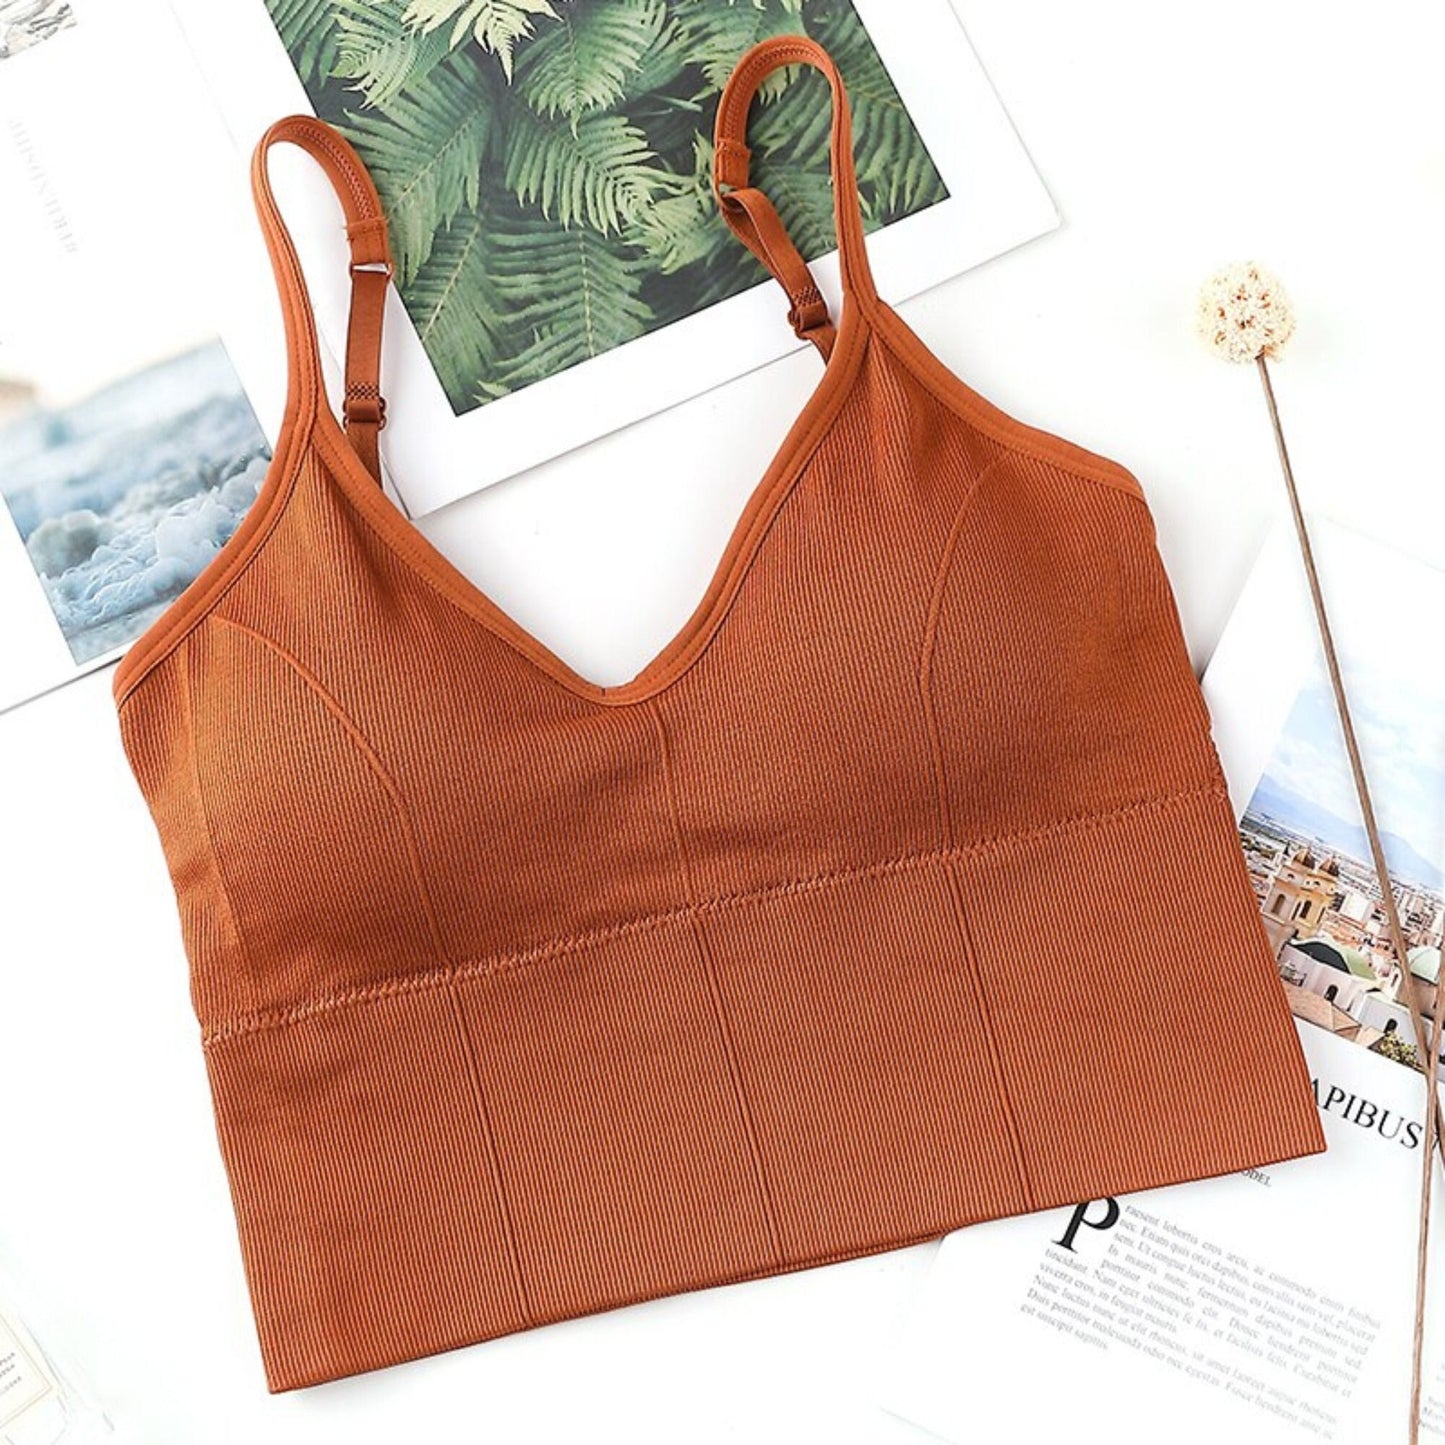 Summer Tops Spring Cotton Tank Top Casual Bralette